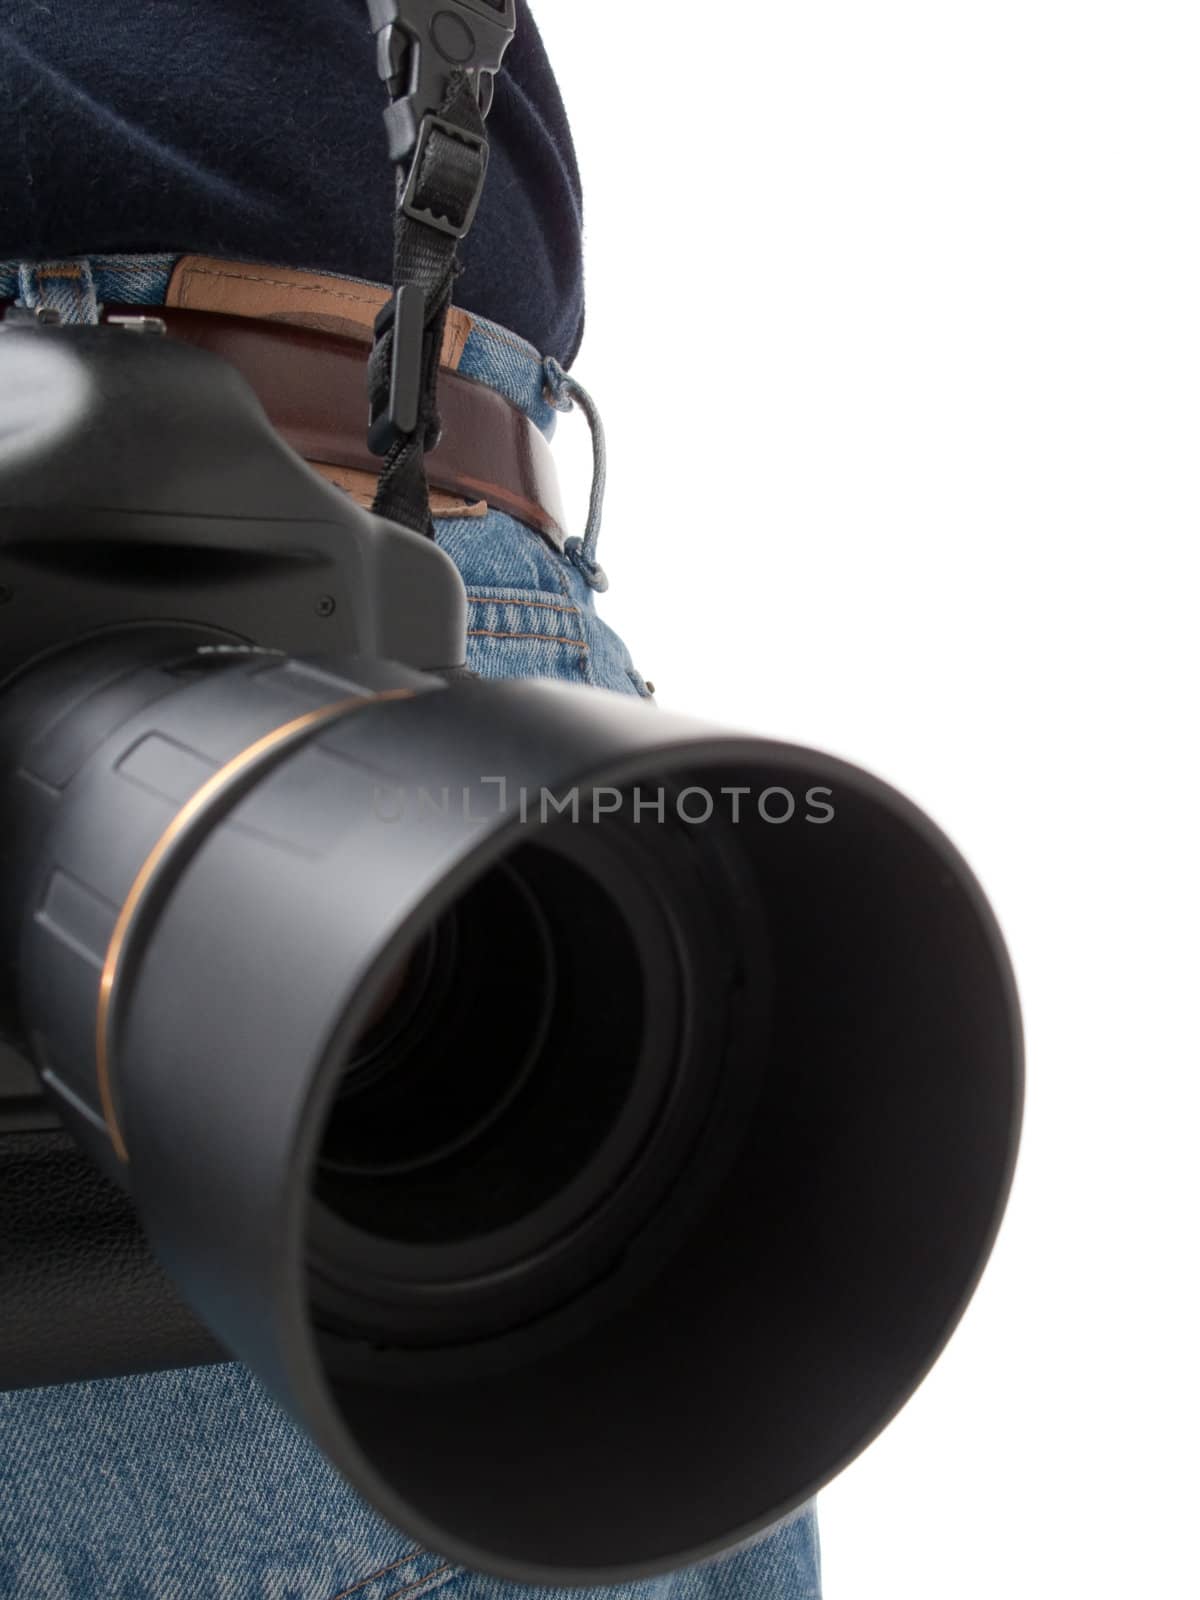 A modern SLR camera hanging off of the back, shot pointing towards the lens, isolated on white.